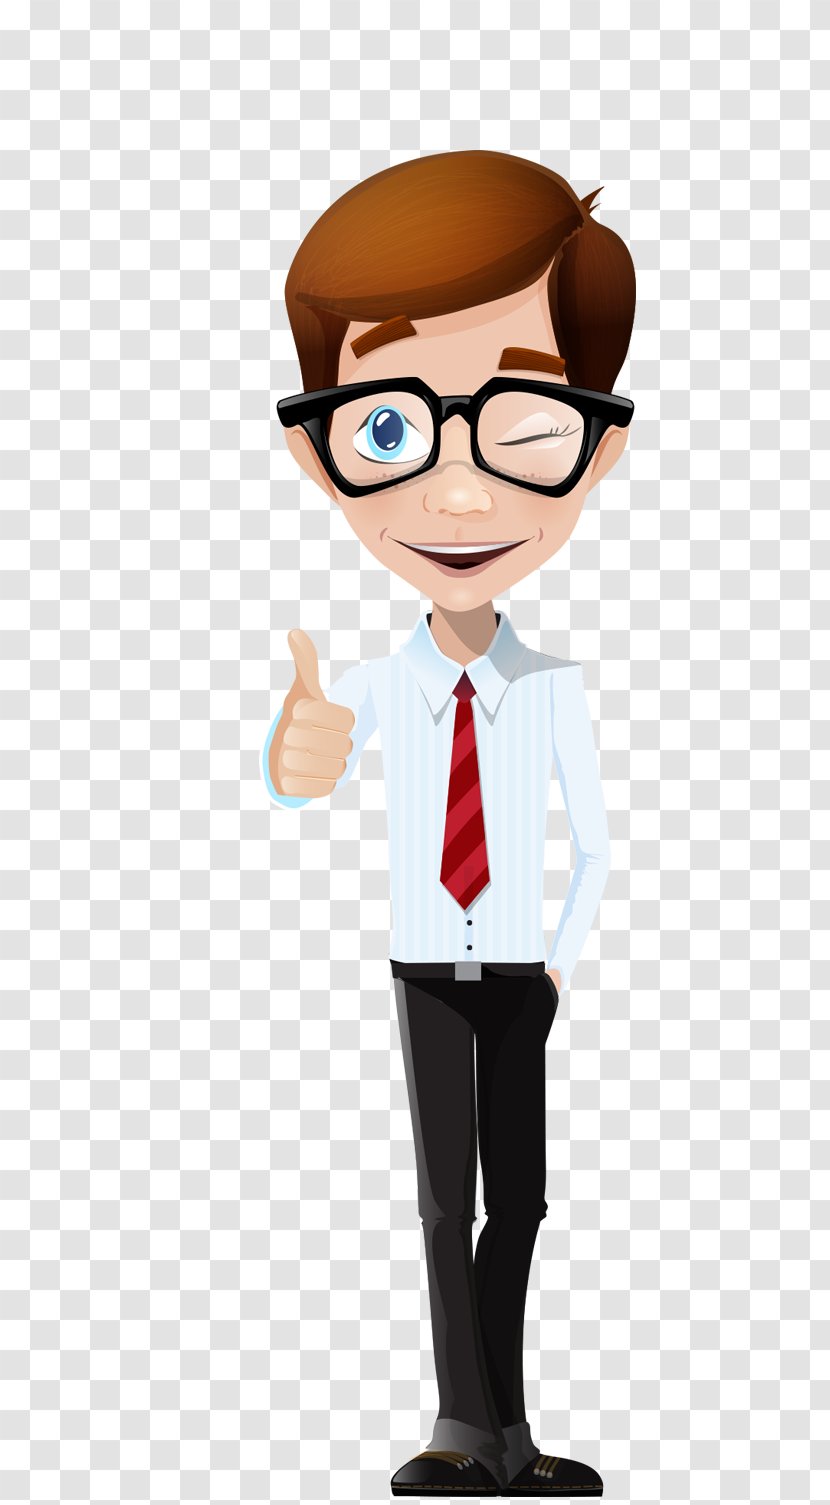 Cartoon Nerd Man Glasses - White Collar Worker - Business People Transparent PNG